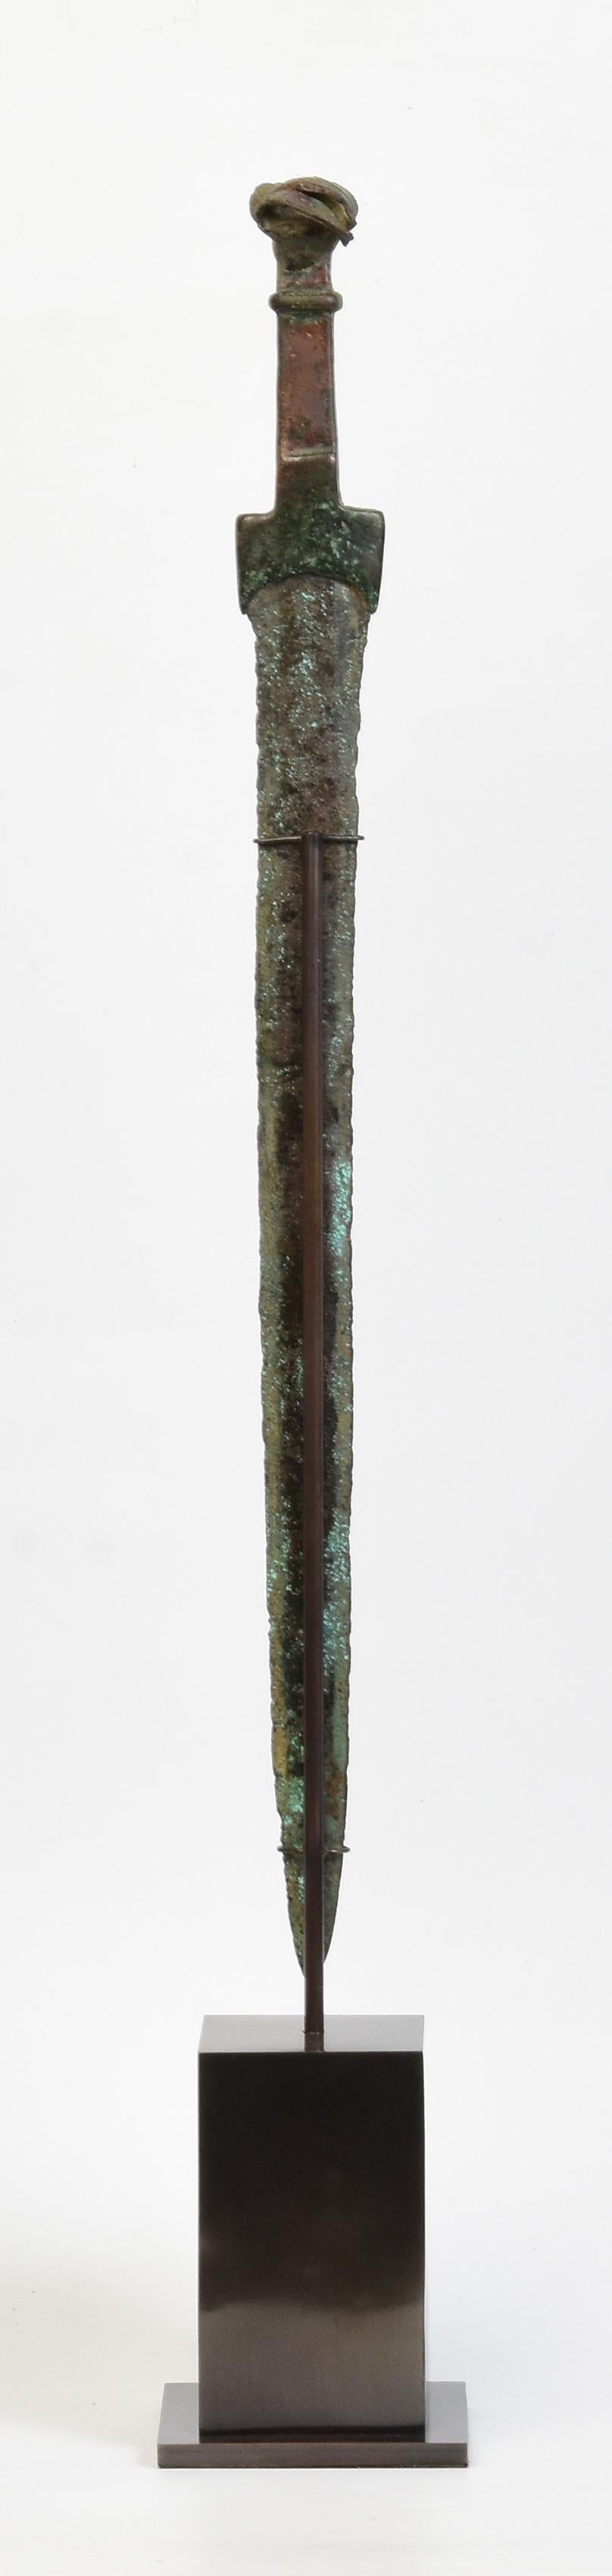 18th Century and Earlier Ancient Antique Luristan Bronze Sword / Knife / Dagger / Early Iron Age Weapon For Sale